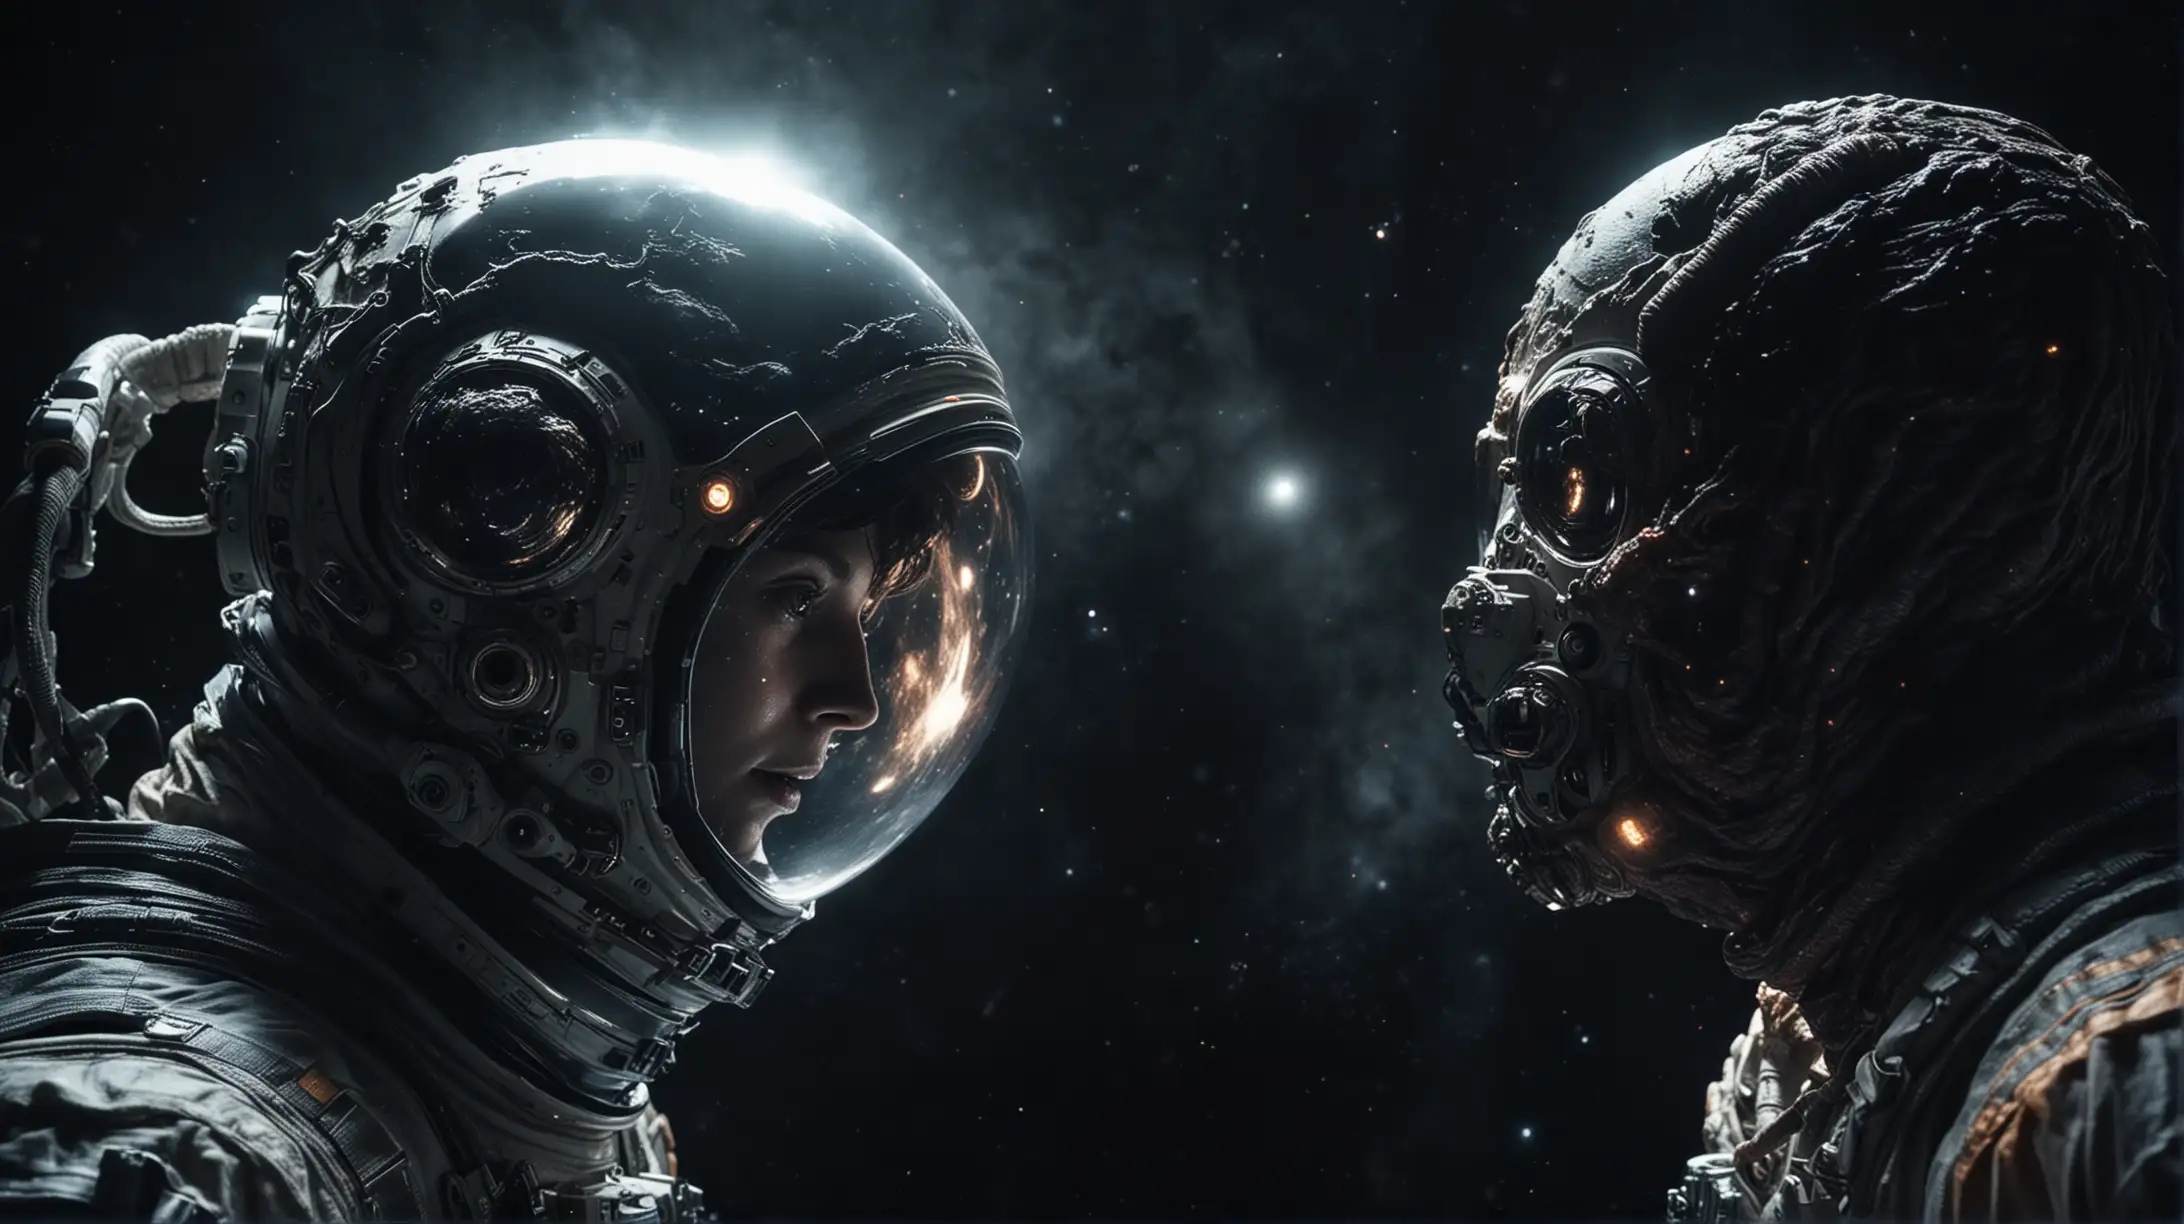 An astronaut floating in the void of space, face-to-face with a sinister, glowing extraterrestrial creature